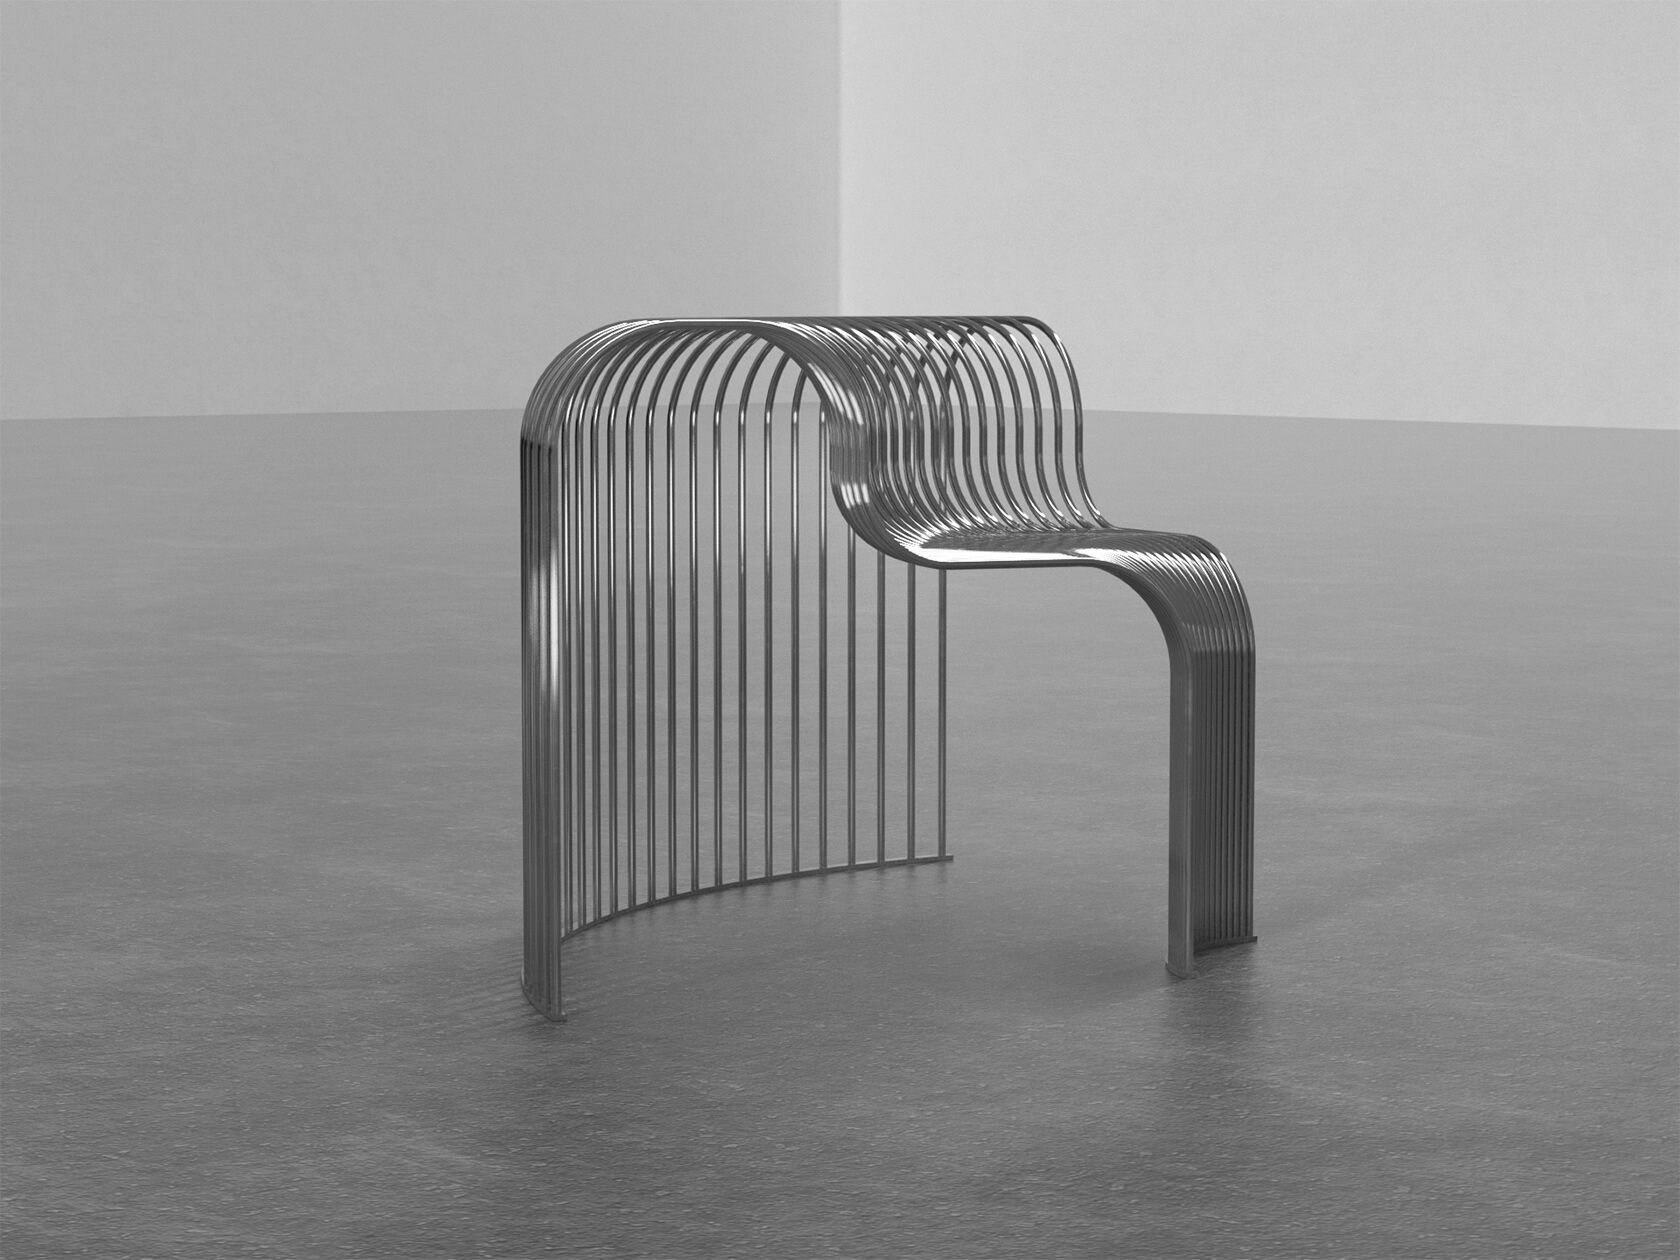 Mira Bergh and Josefin Zachrisson on Seats, a sculptural furniture system rethinking seats in the public environment